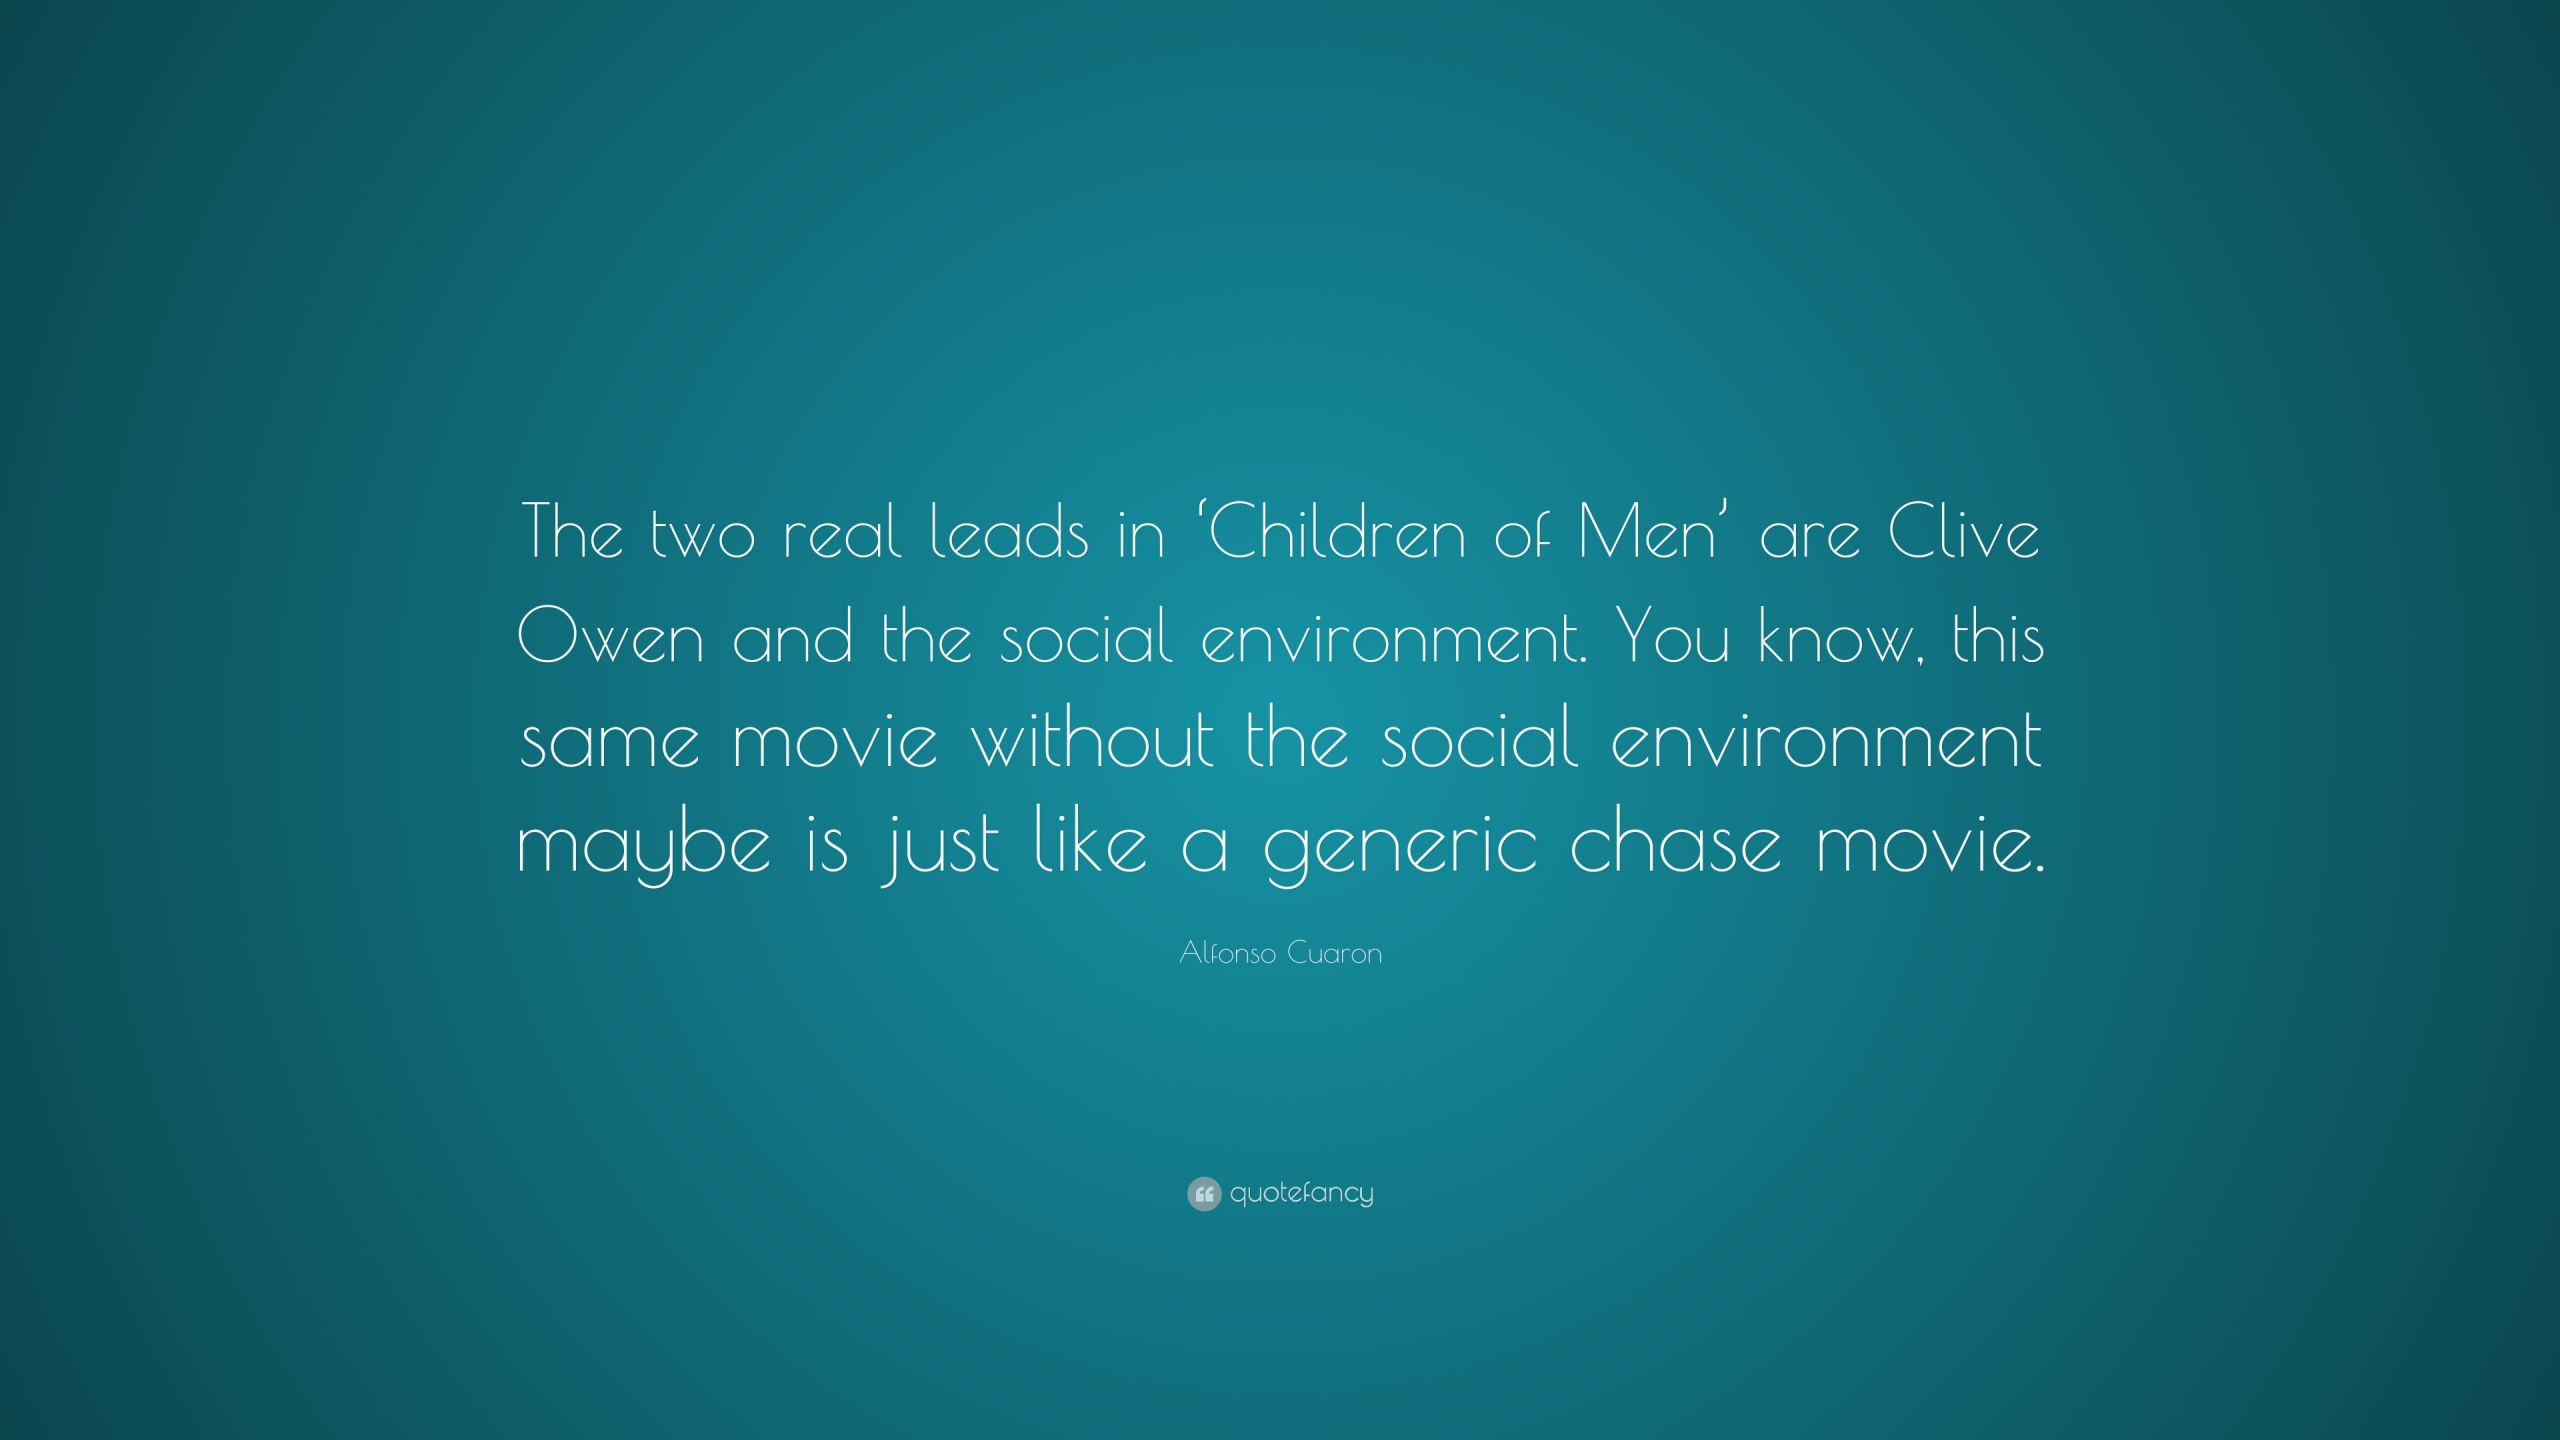 Children Of Men Quotes
 Alfonso Cuaron Quotes 37 wallpapers Quotefancy